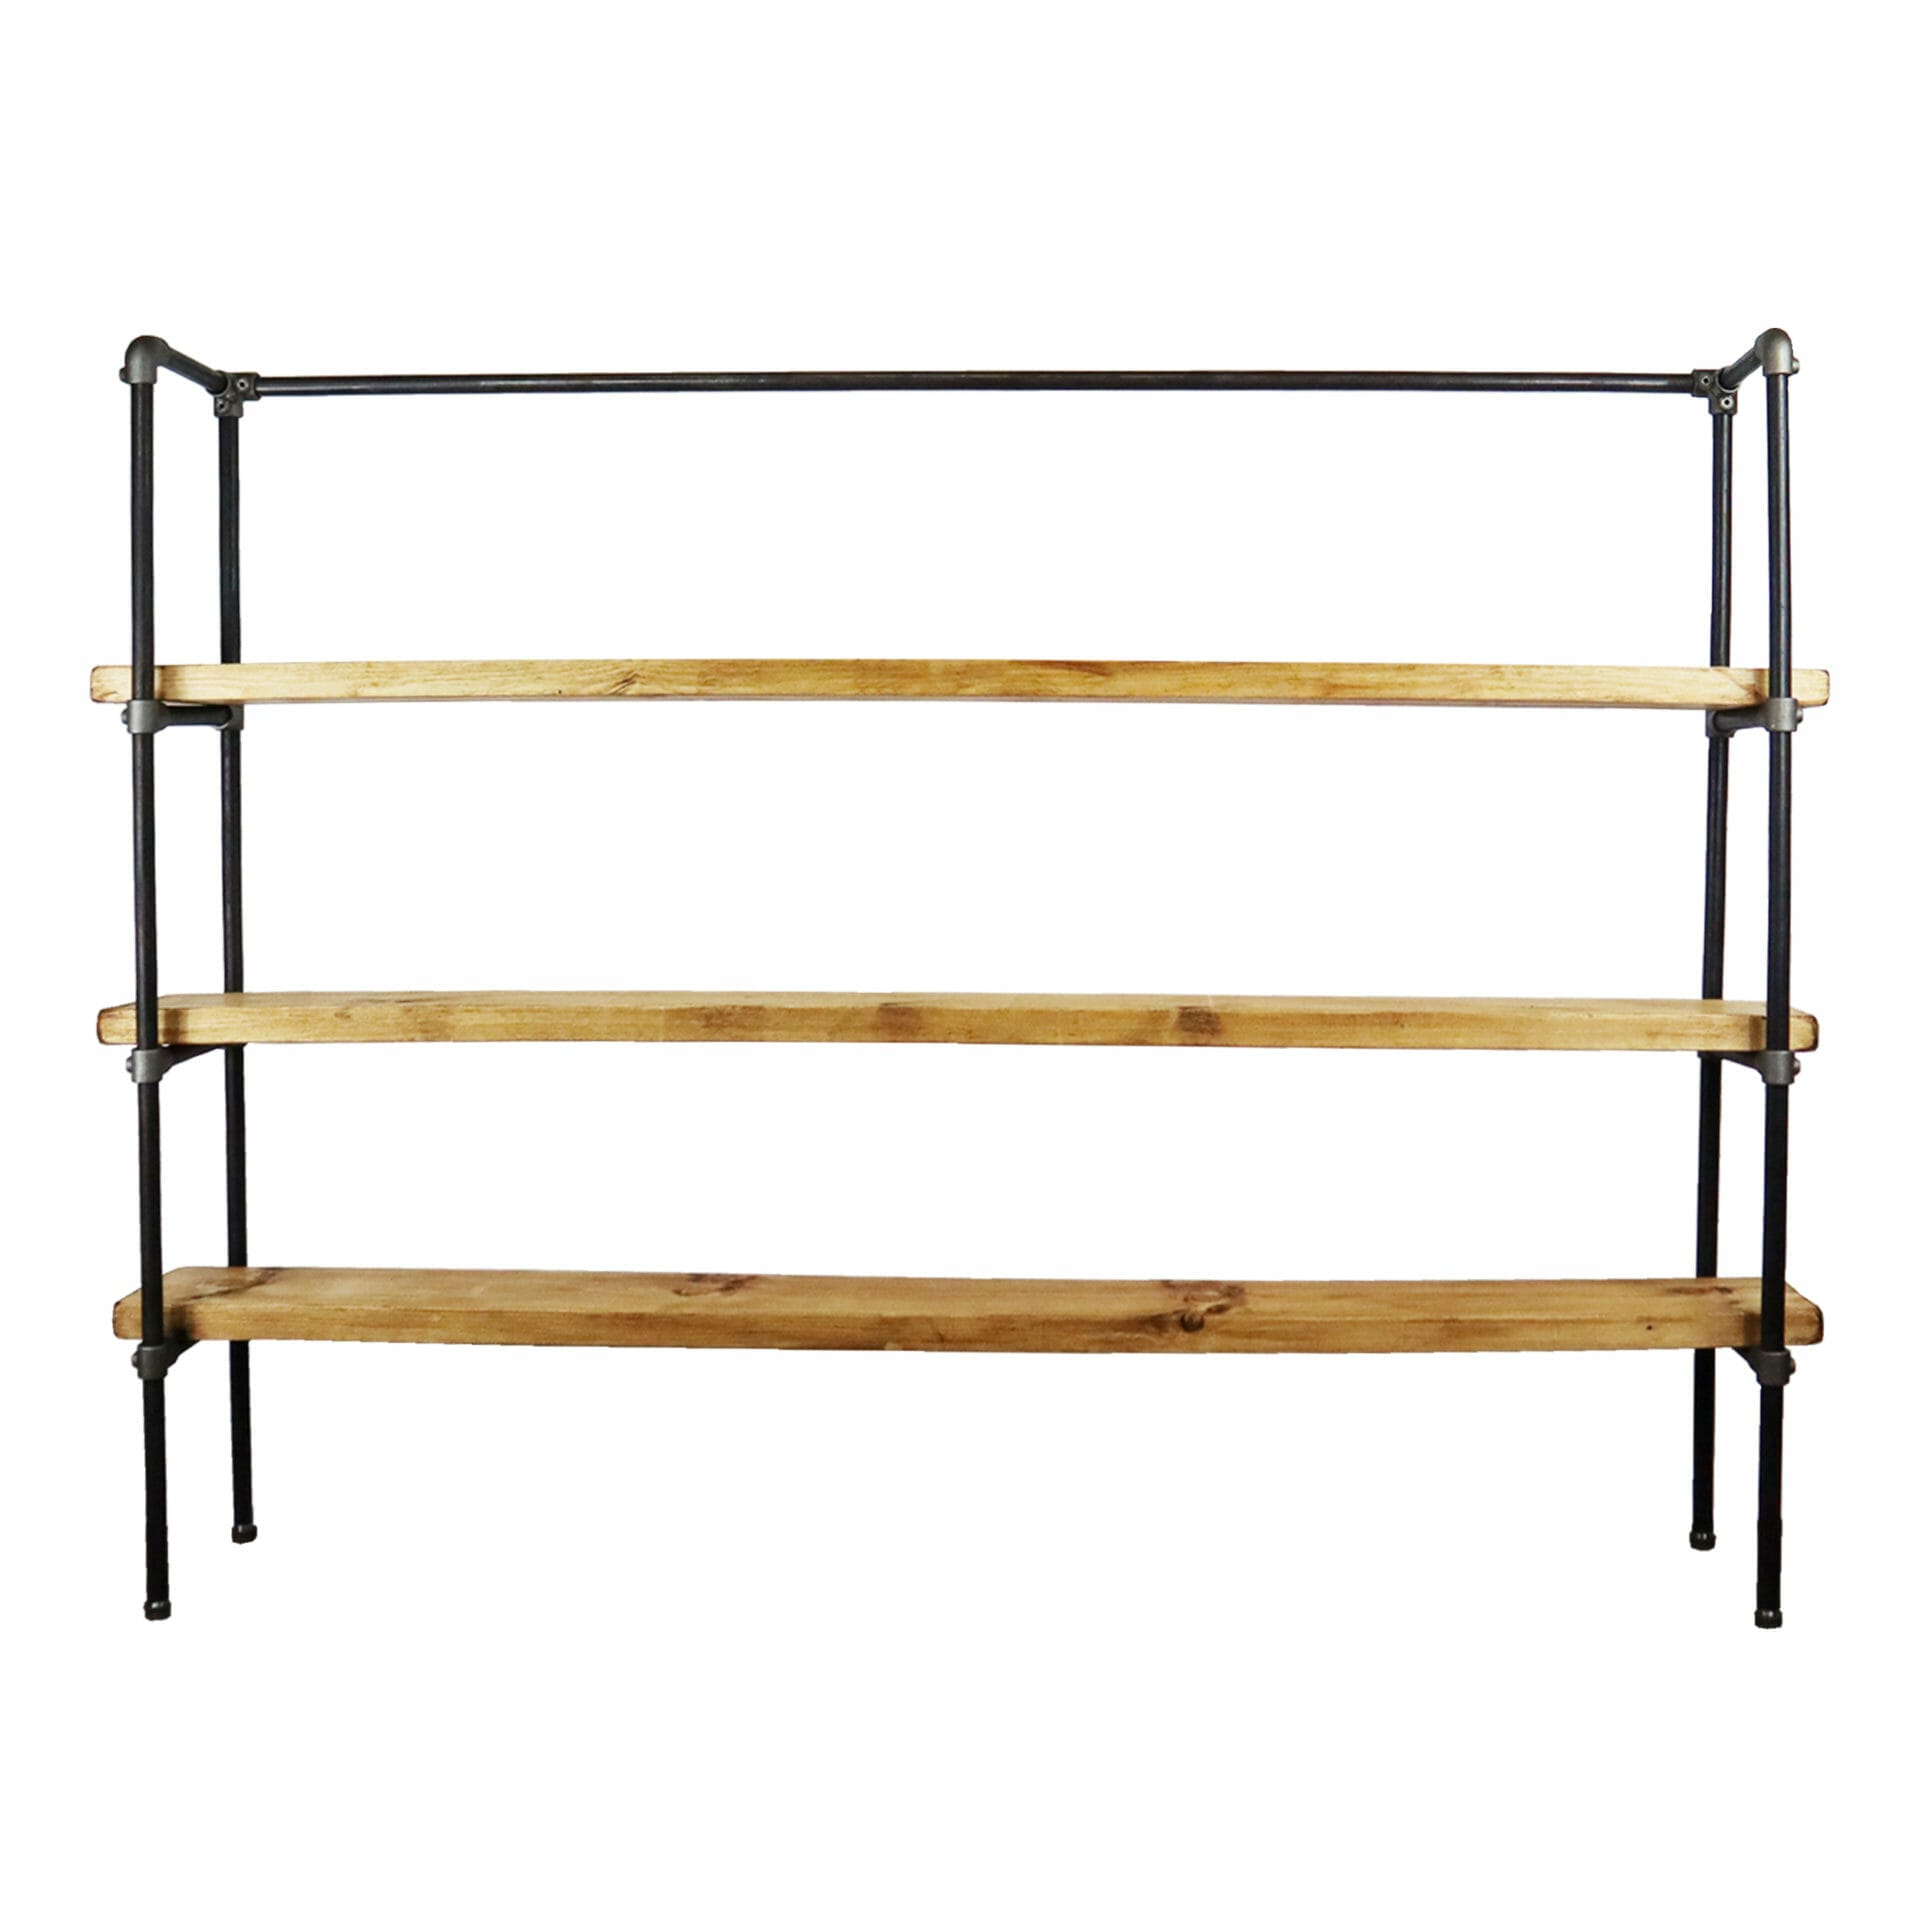 Raw steel industrial pipe shelving unit with reclaimed wooden shelves freestanding